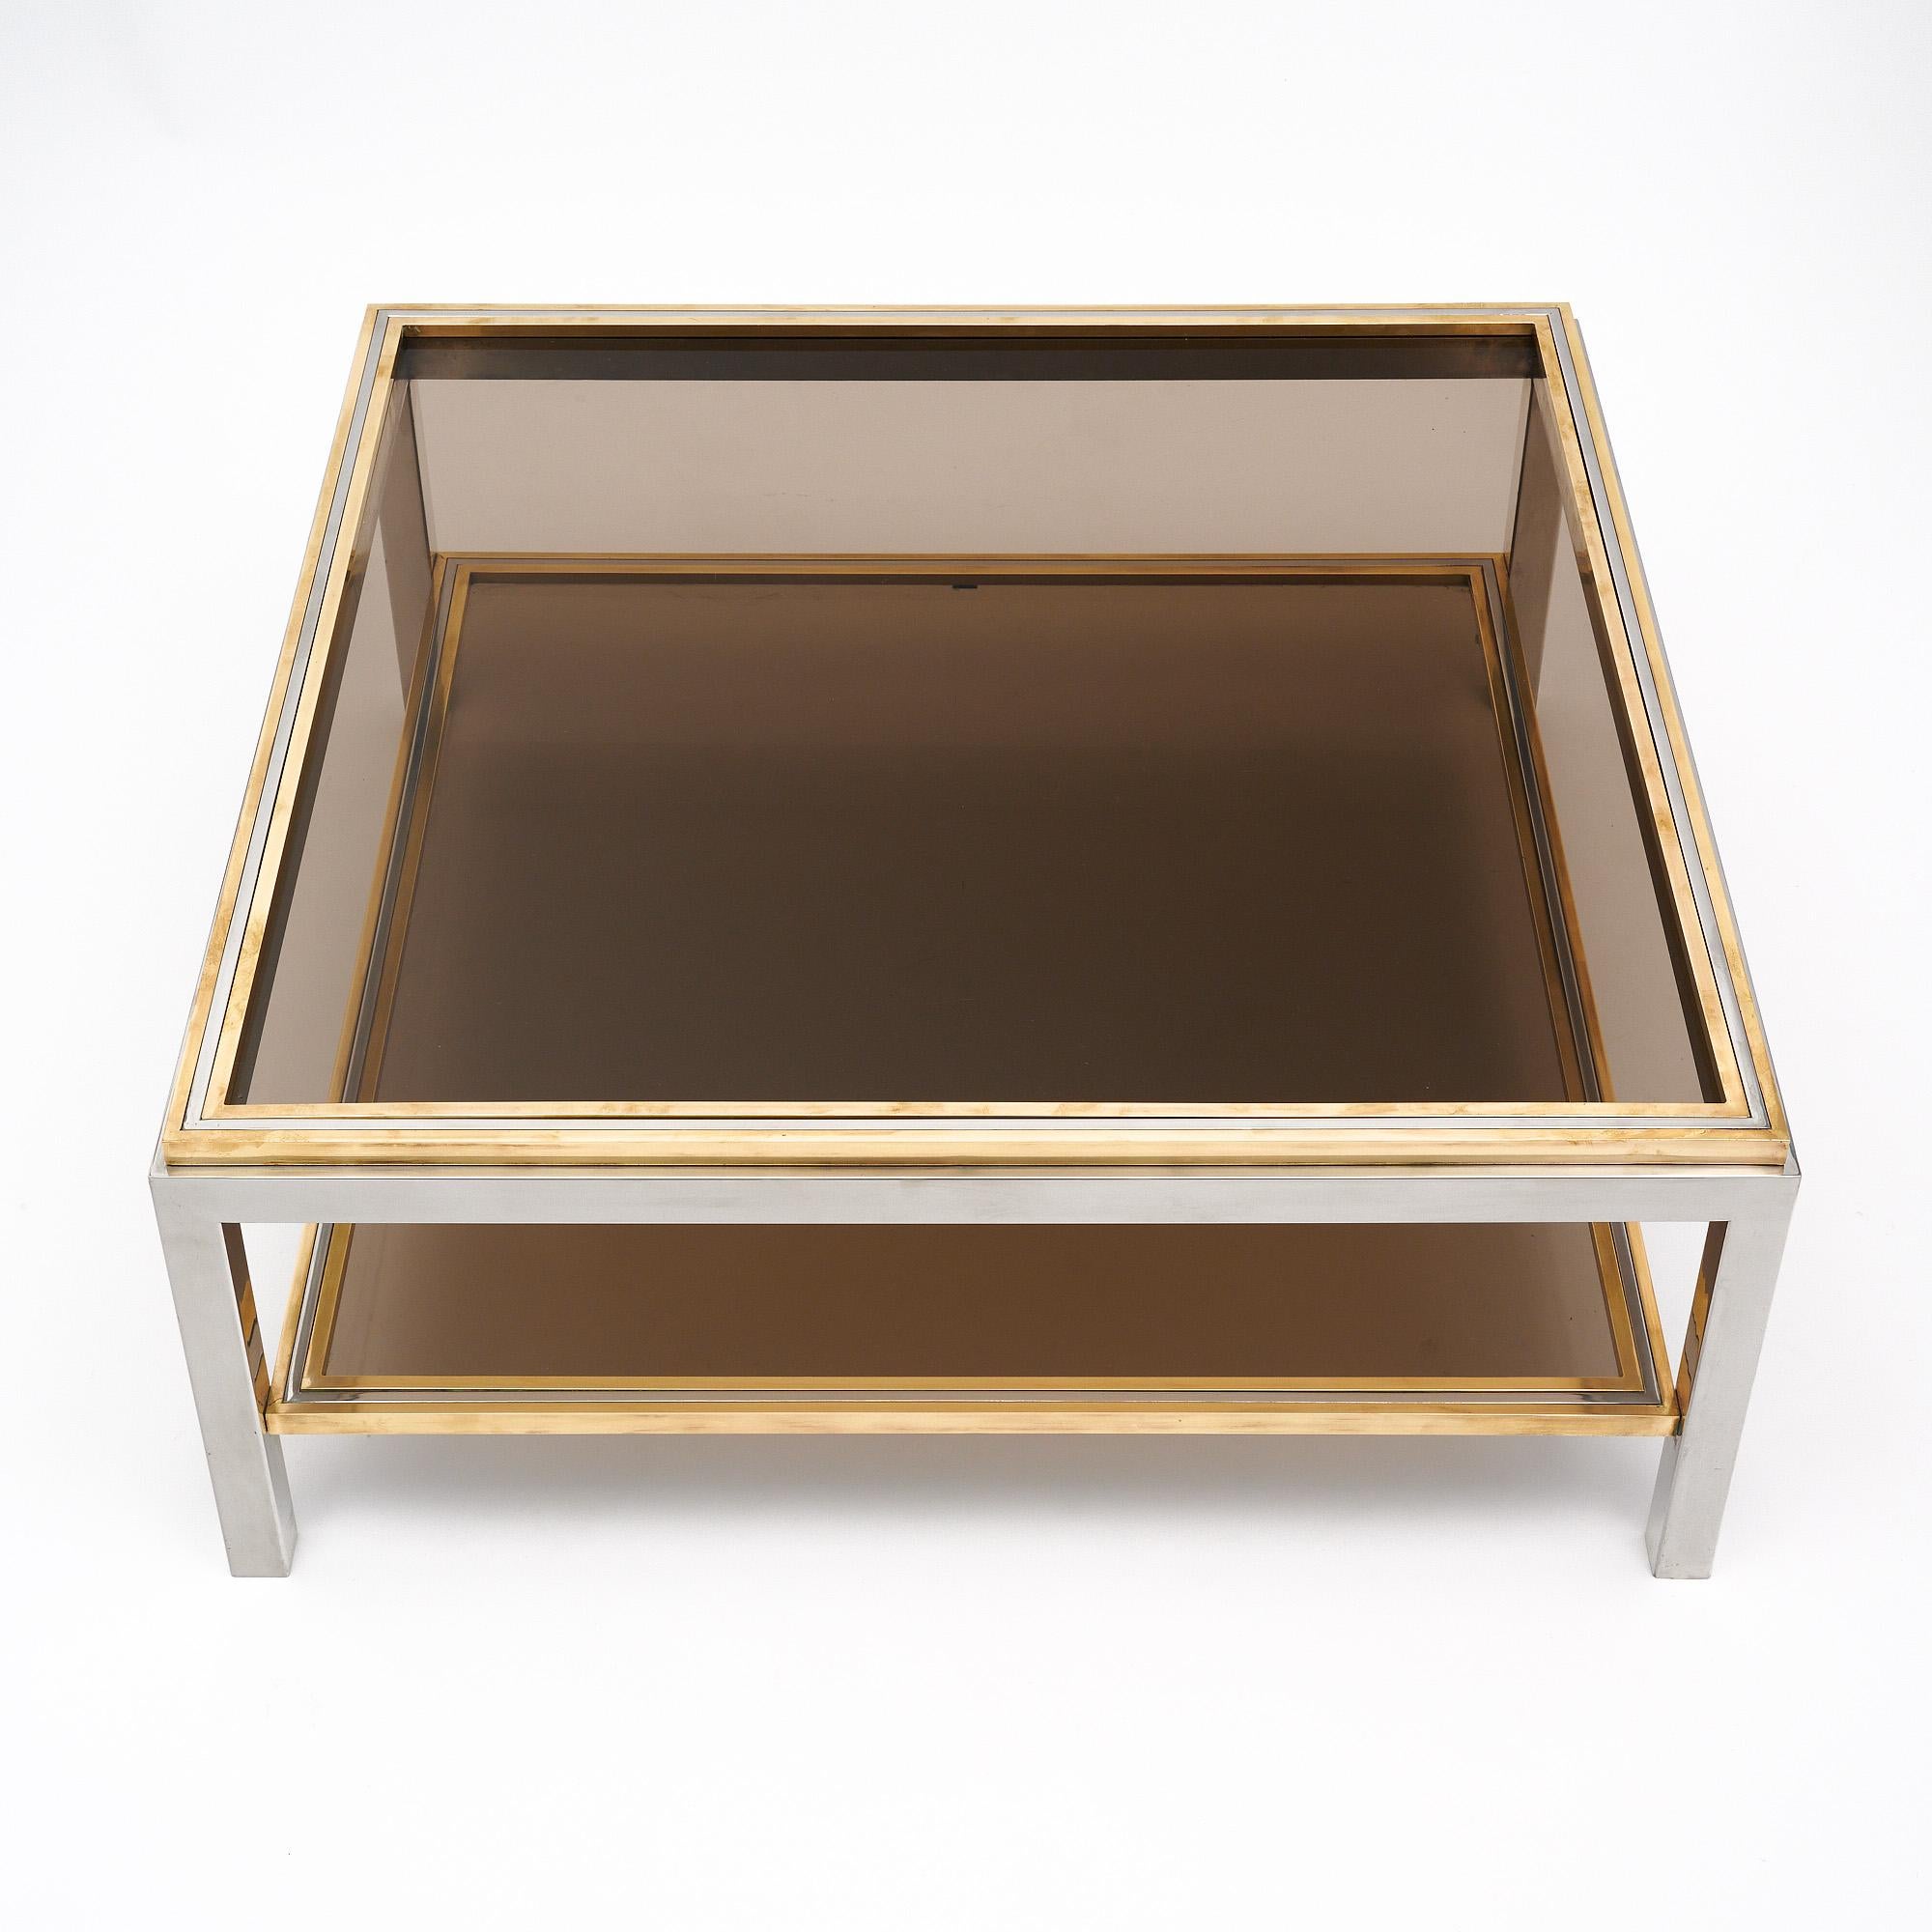 Rare Willy Rizzo coffee table from Italy. This piece is made of chromed steel with the top and lower shelf of smoked glass. The piece features brass trim throughout. Signed.
